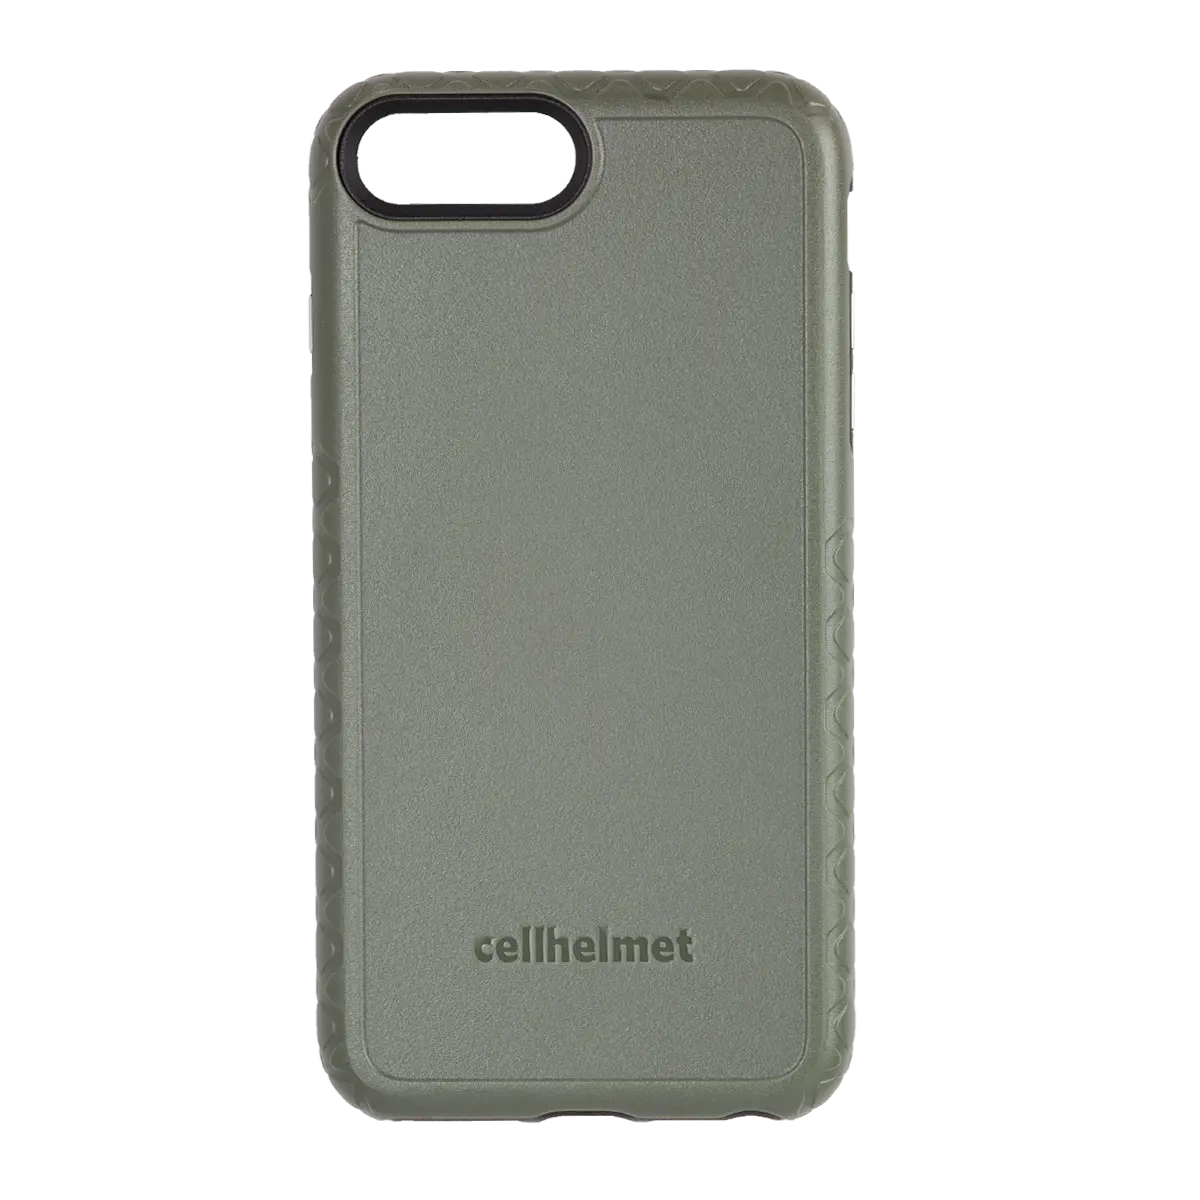 Army Green cellhelmet Customizable Case for iPhone 8 Plus